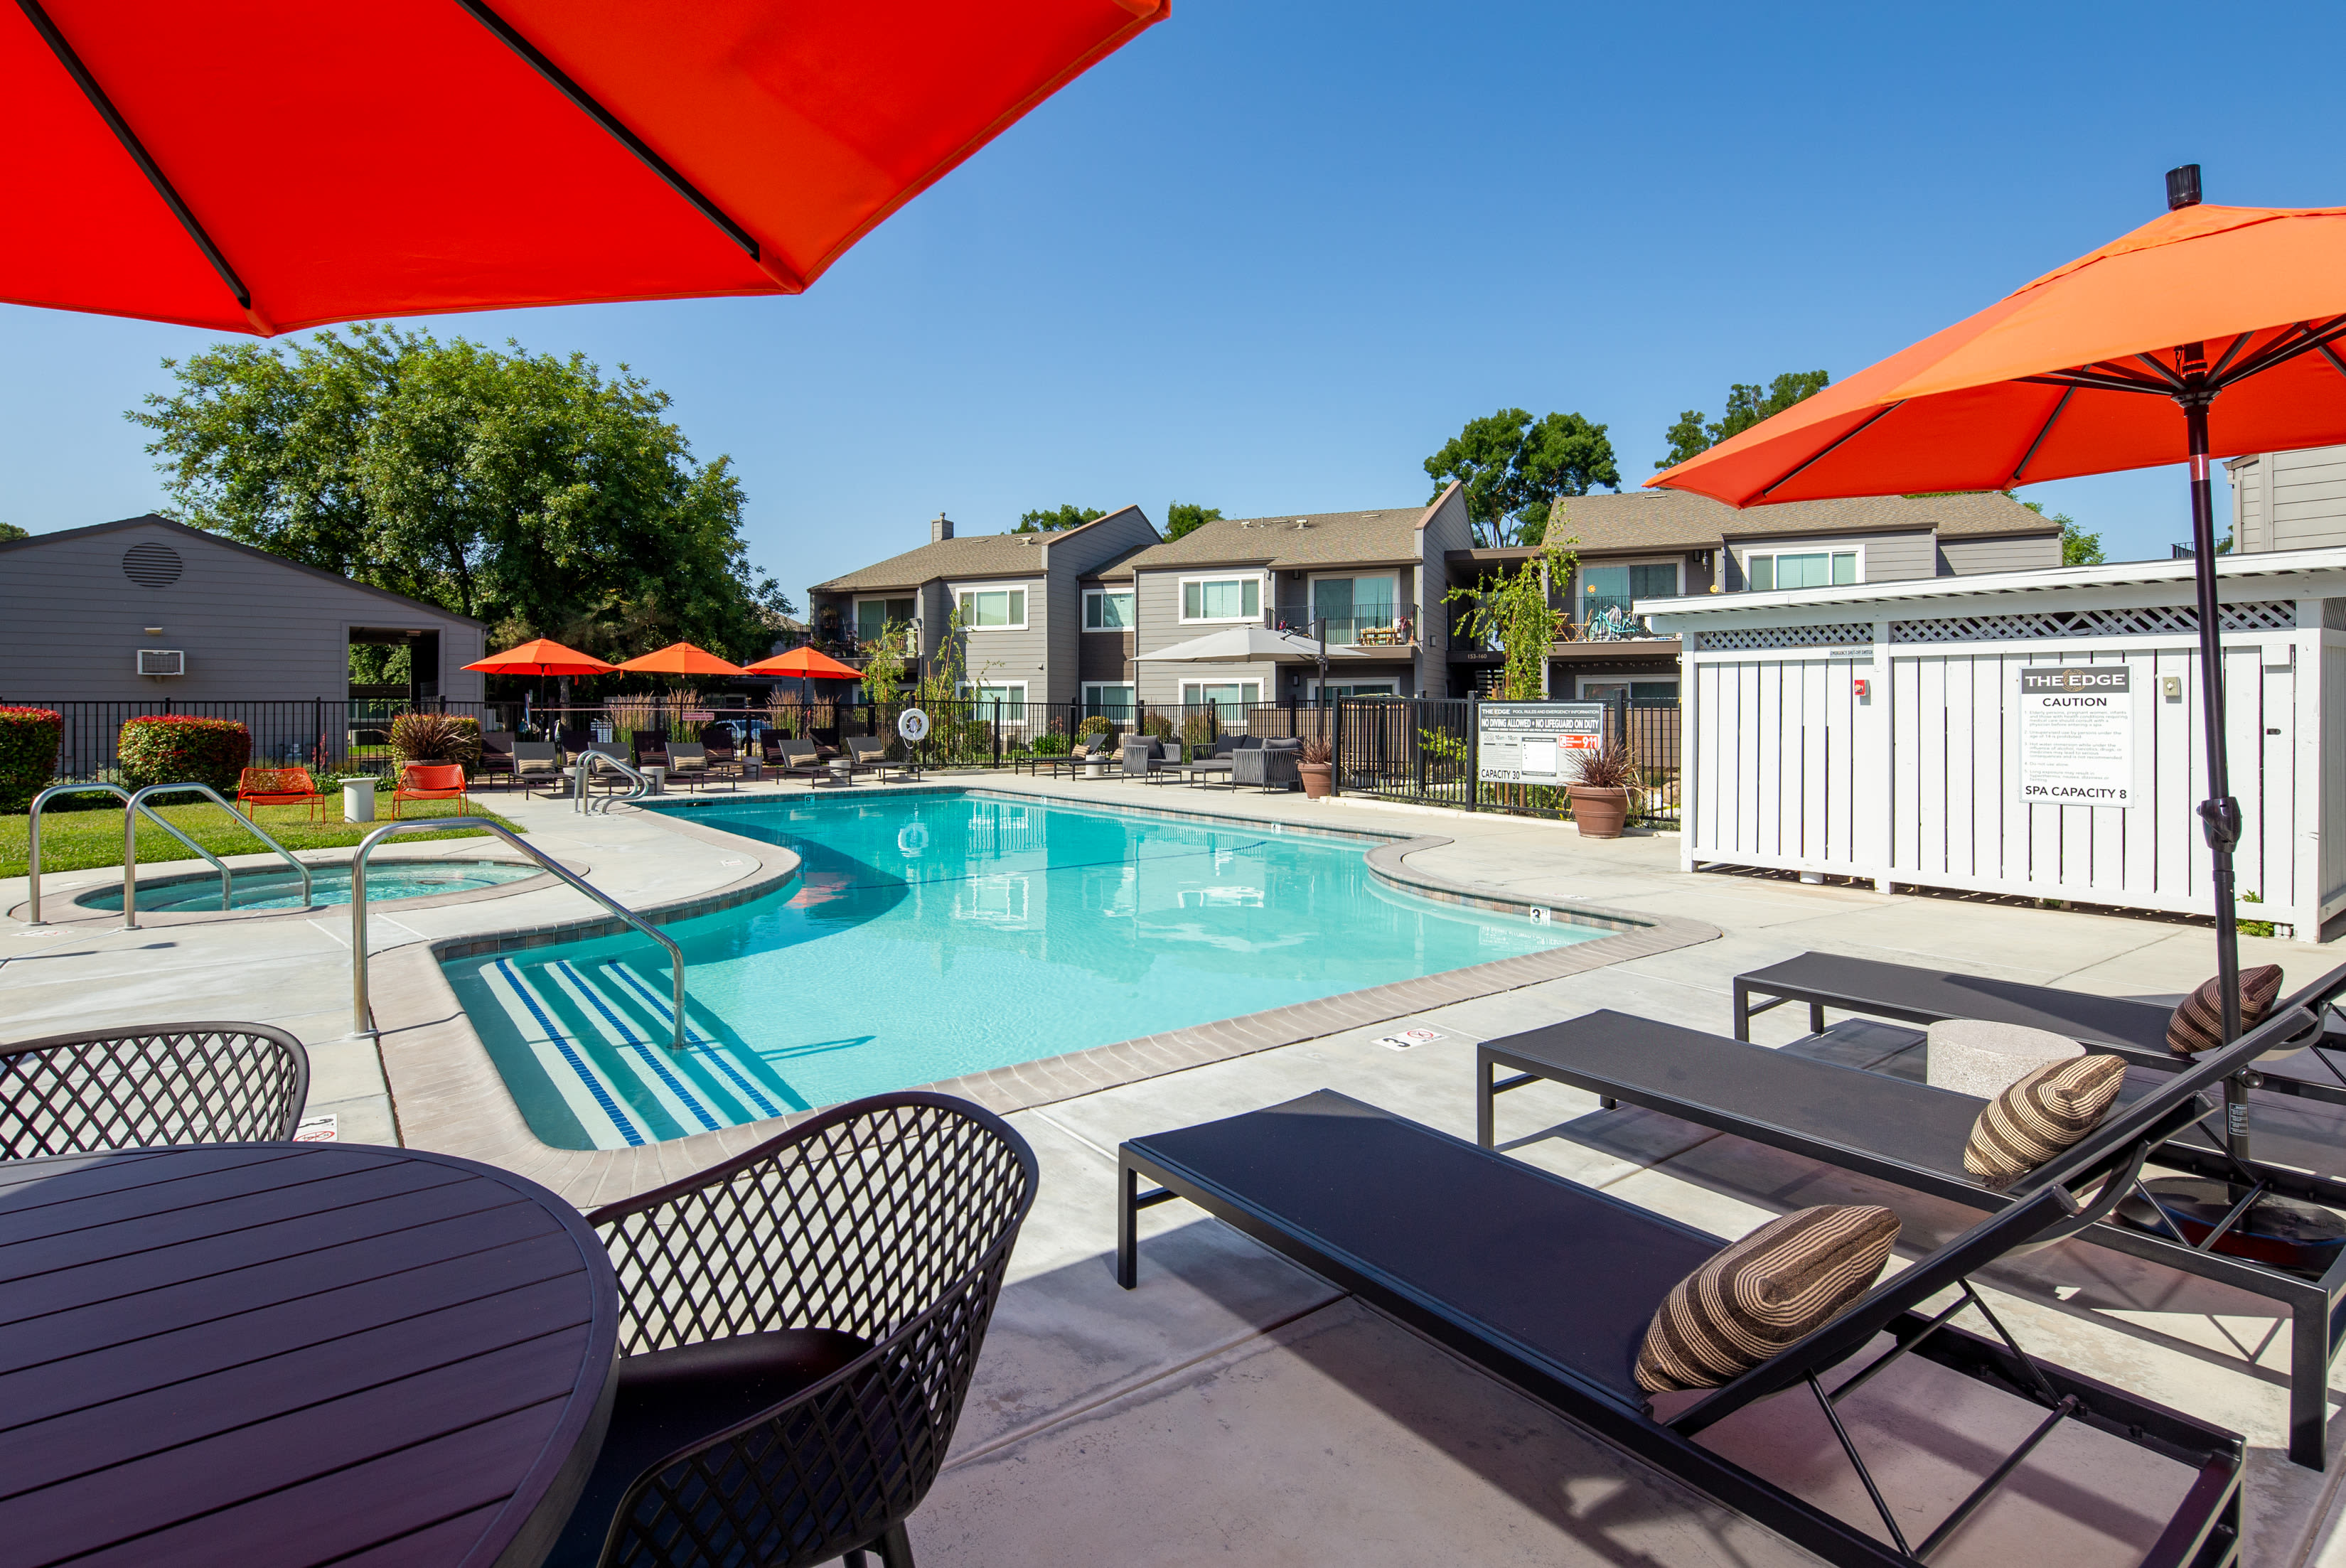 Swimming pool with lounge chairs at The Edge in Modesto, California